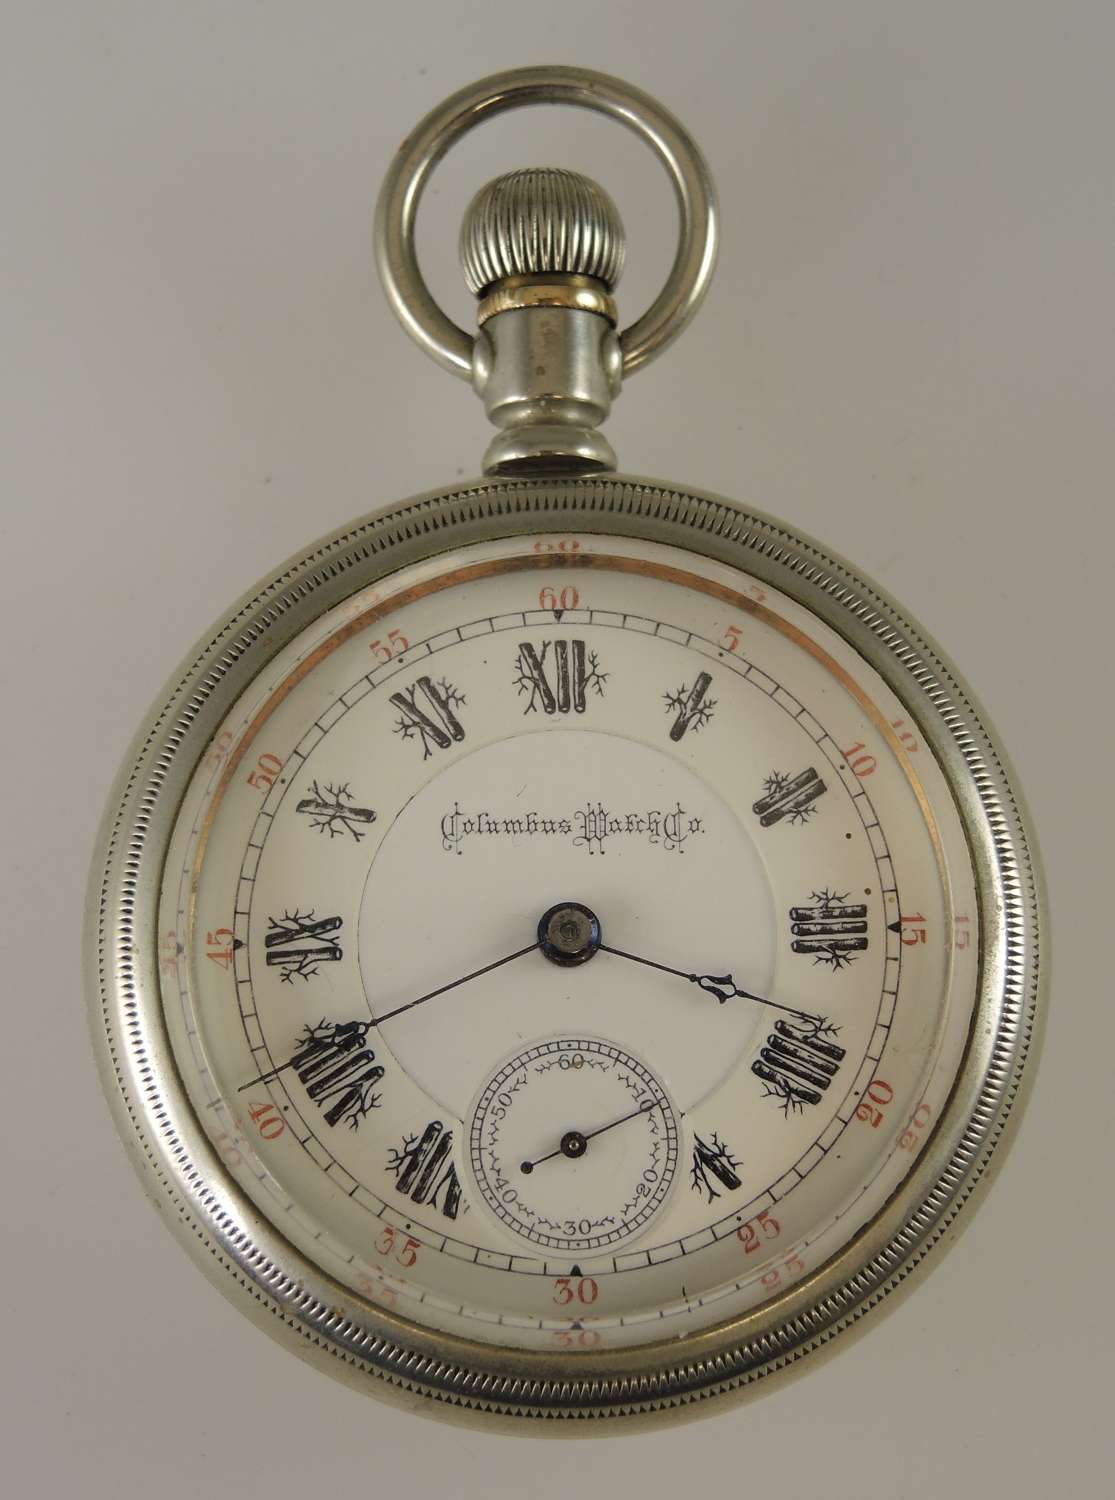 18s pocket watch by Columbus Watch with Rare TREE Dial Co 1893